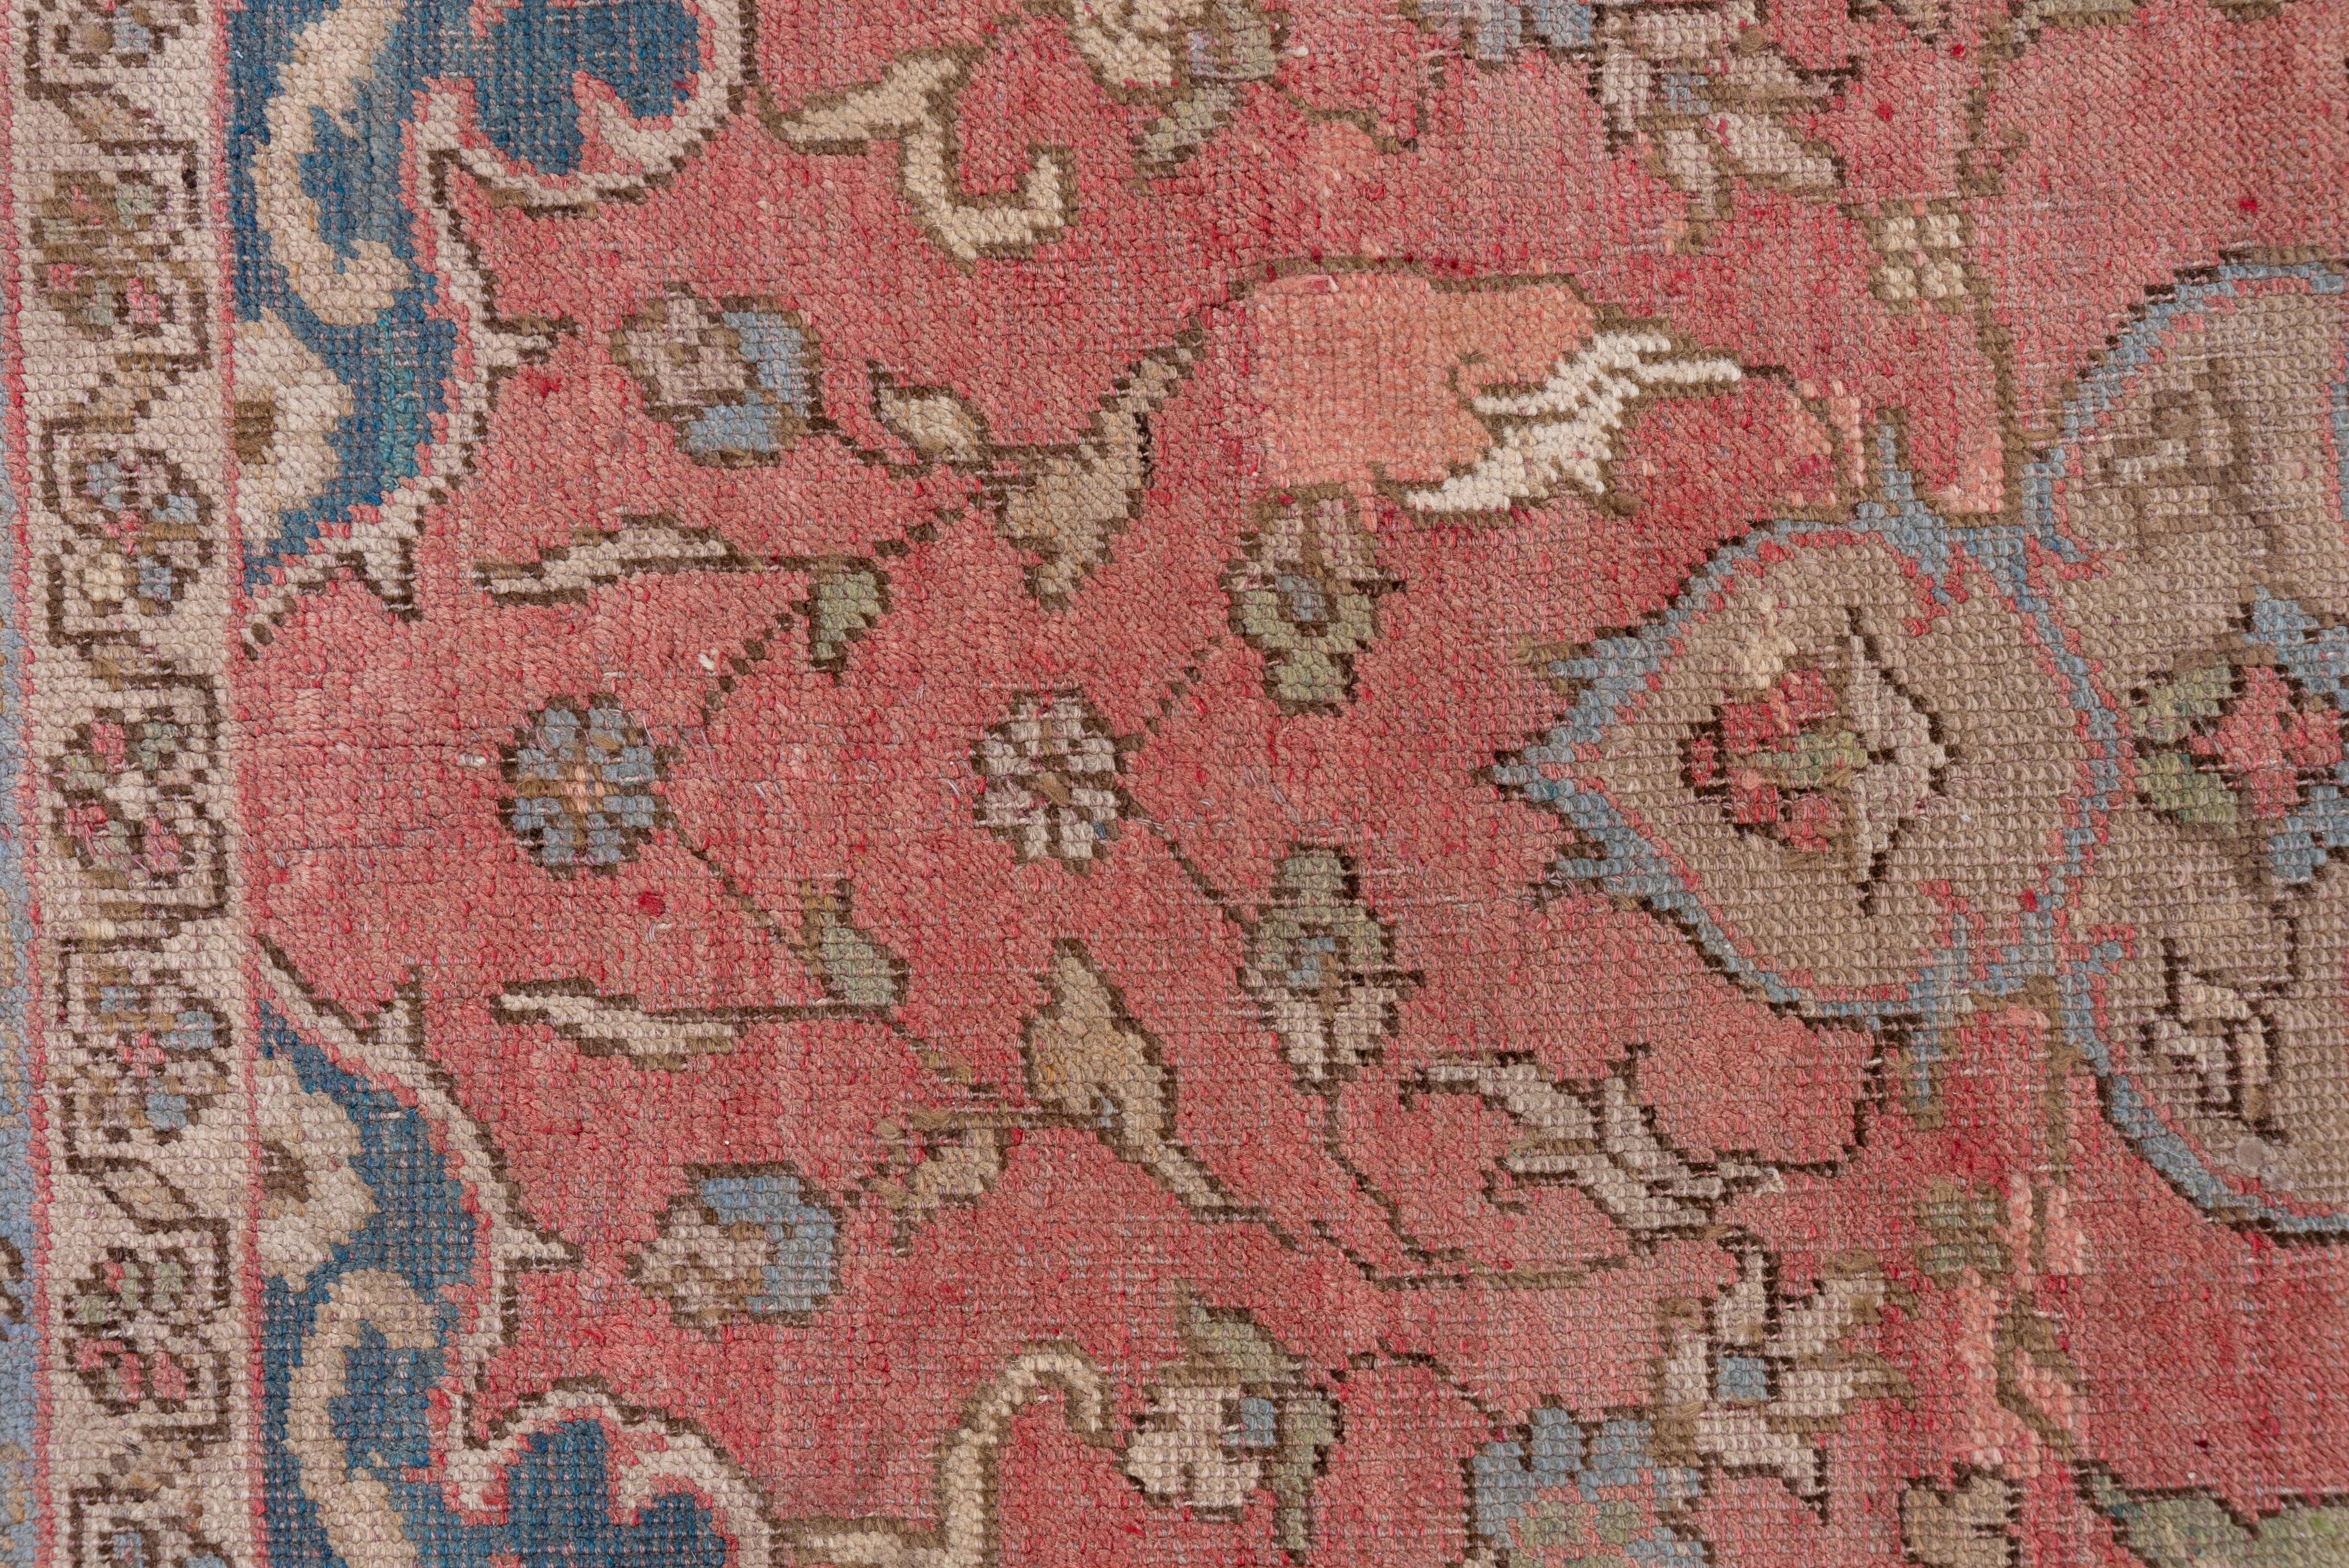 Definitely in a Persian urban style, this moderately closely woven west Turkish workshop piece shows a soft rose field centred by a pendanted straw octogramme medallion with a conforming light blue octofoil sub-medallion. Arabesque vinery with small